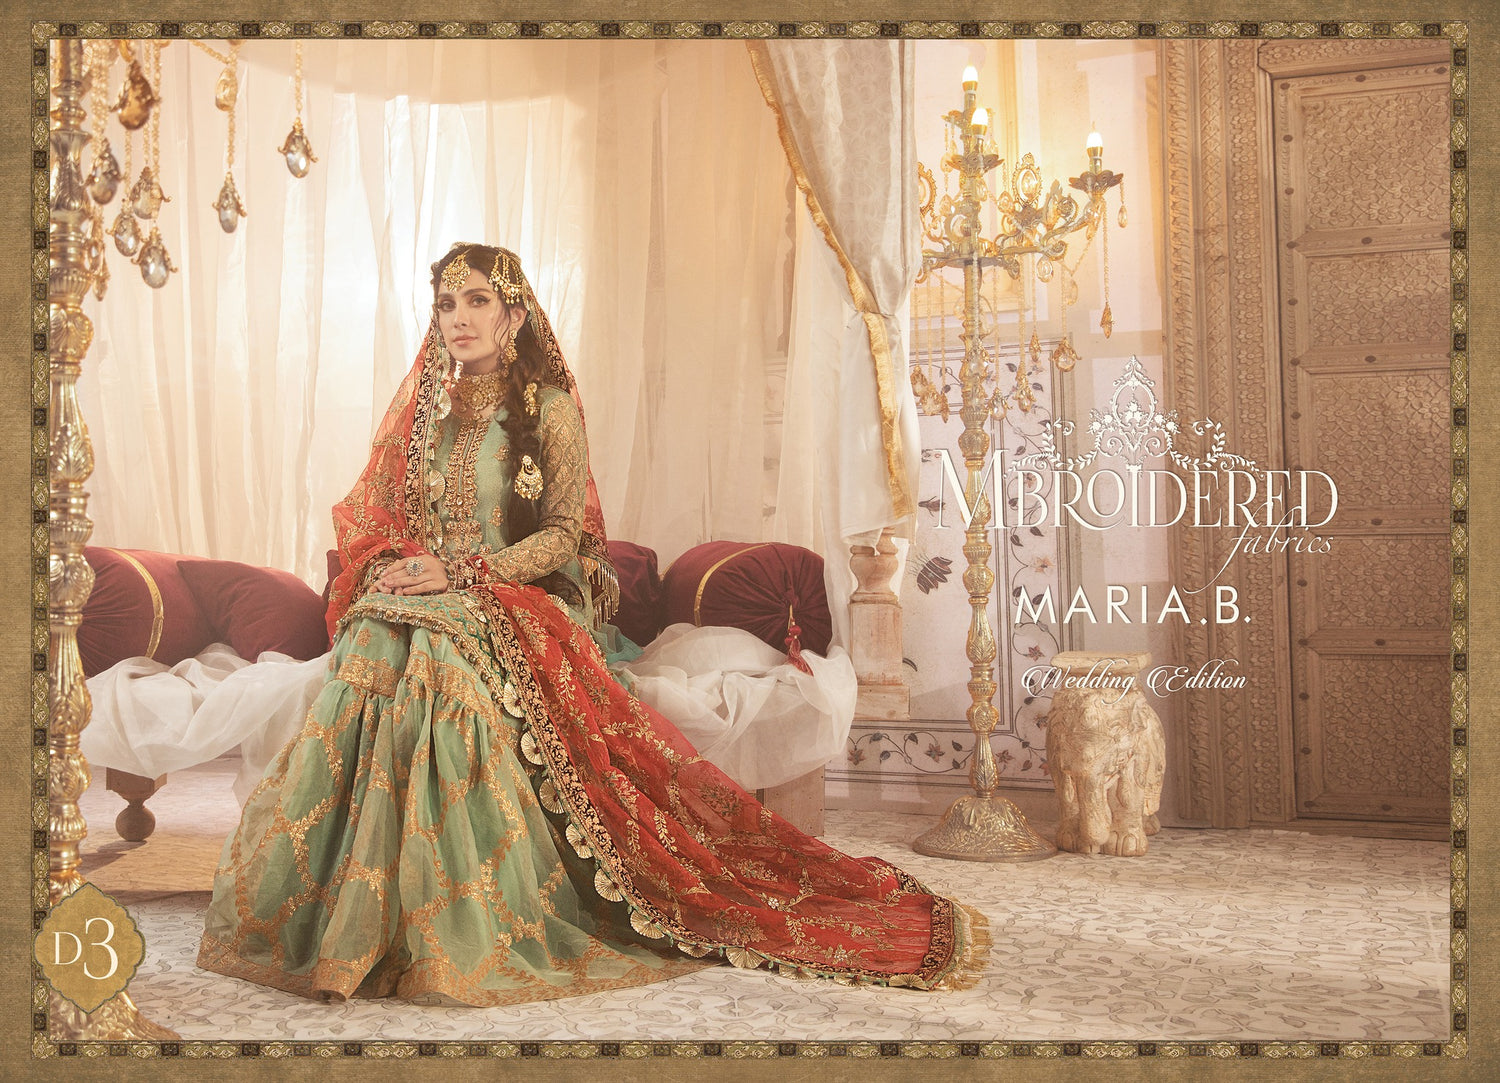 MARIA.B. Mbroidered Unstitched Wedding Edition'21